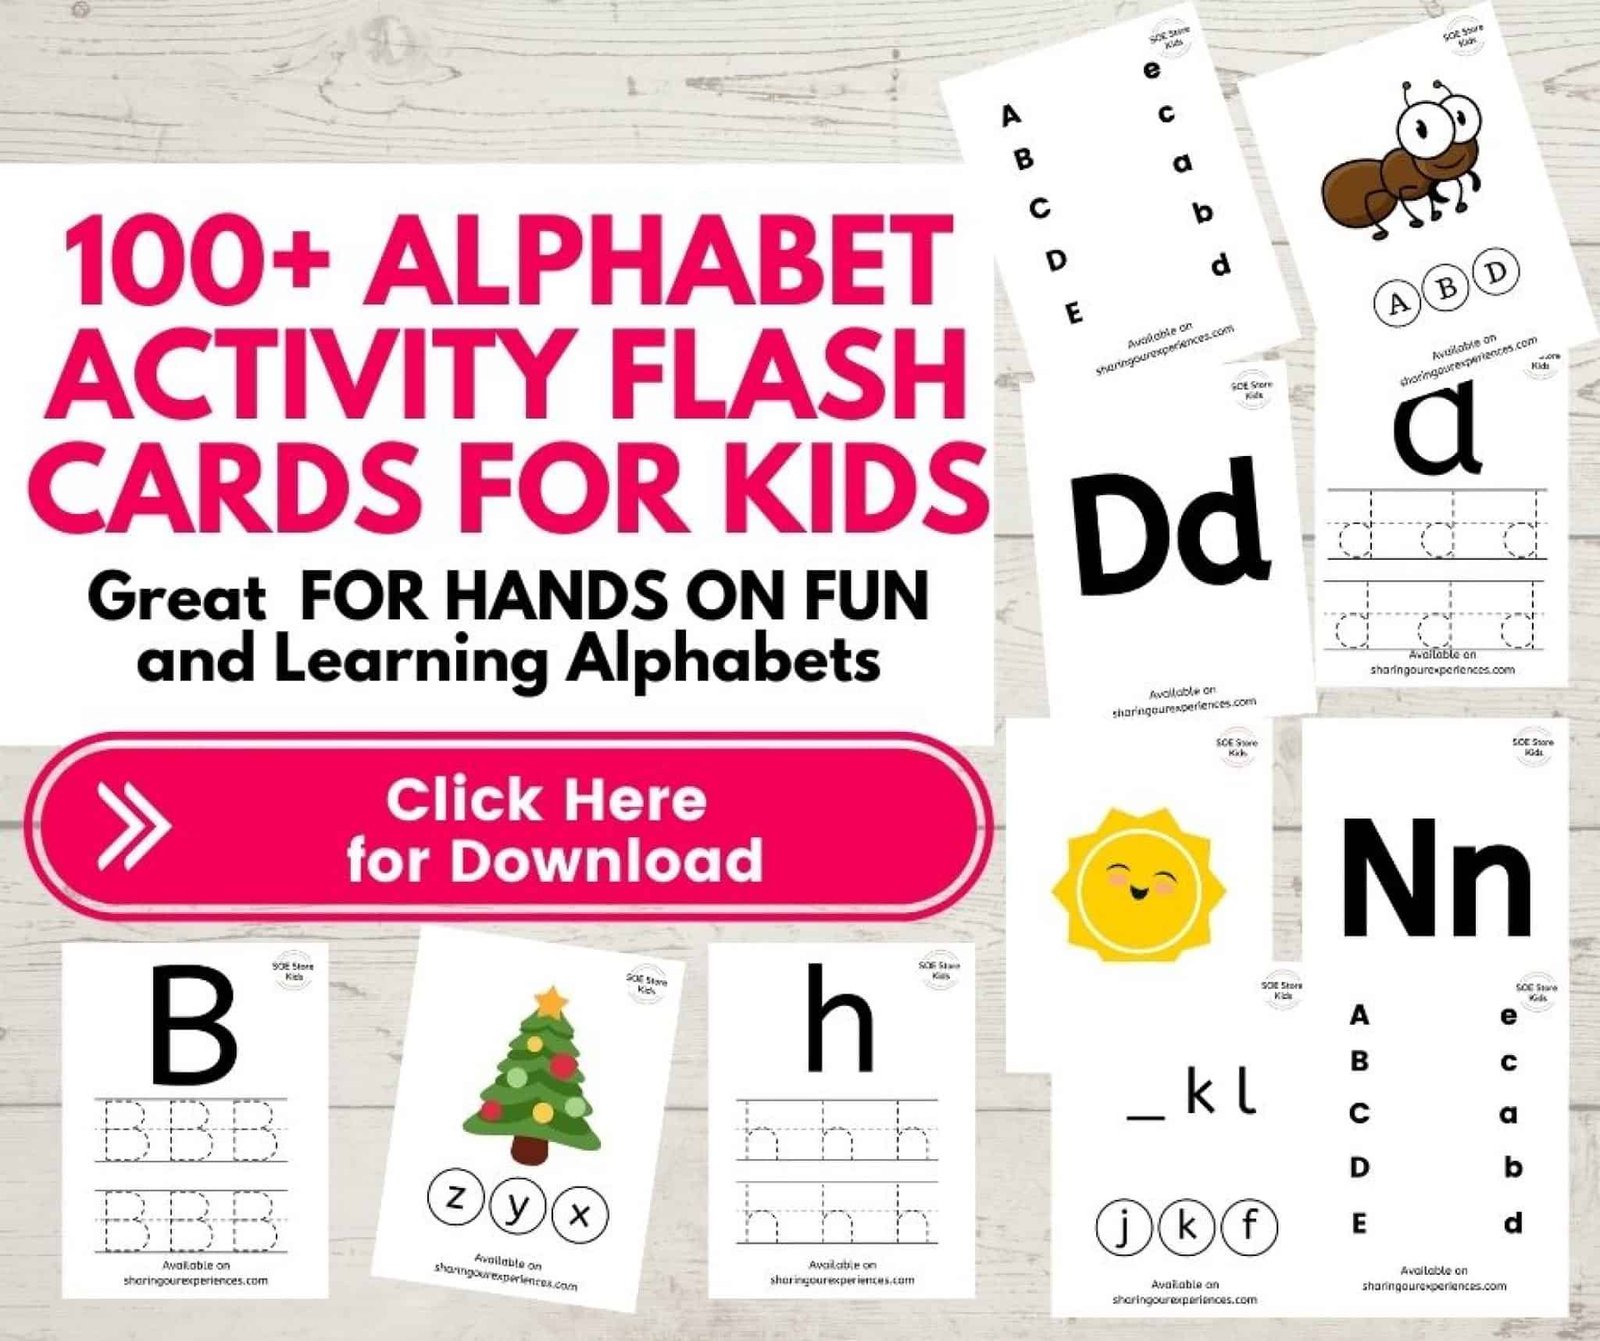 quick-and-easy-flashcards-activities-with-toddlers-fun-ways-to-use-flashcards-at-home